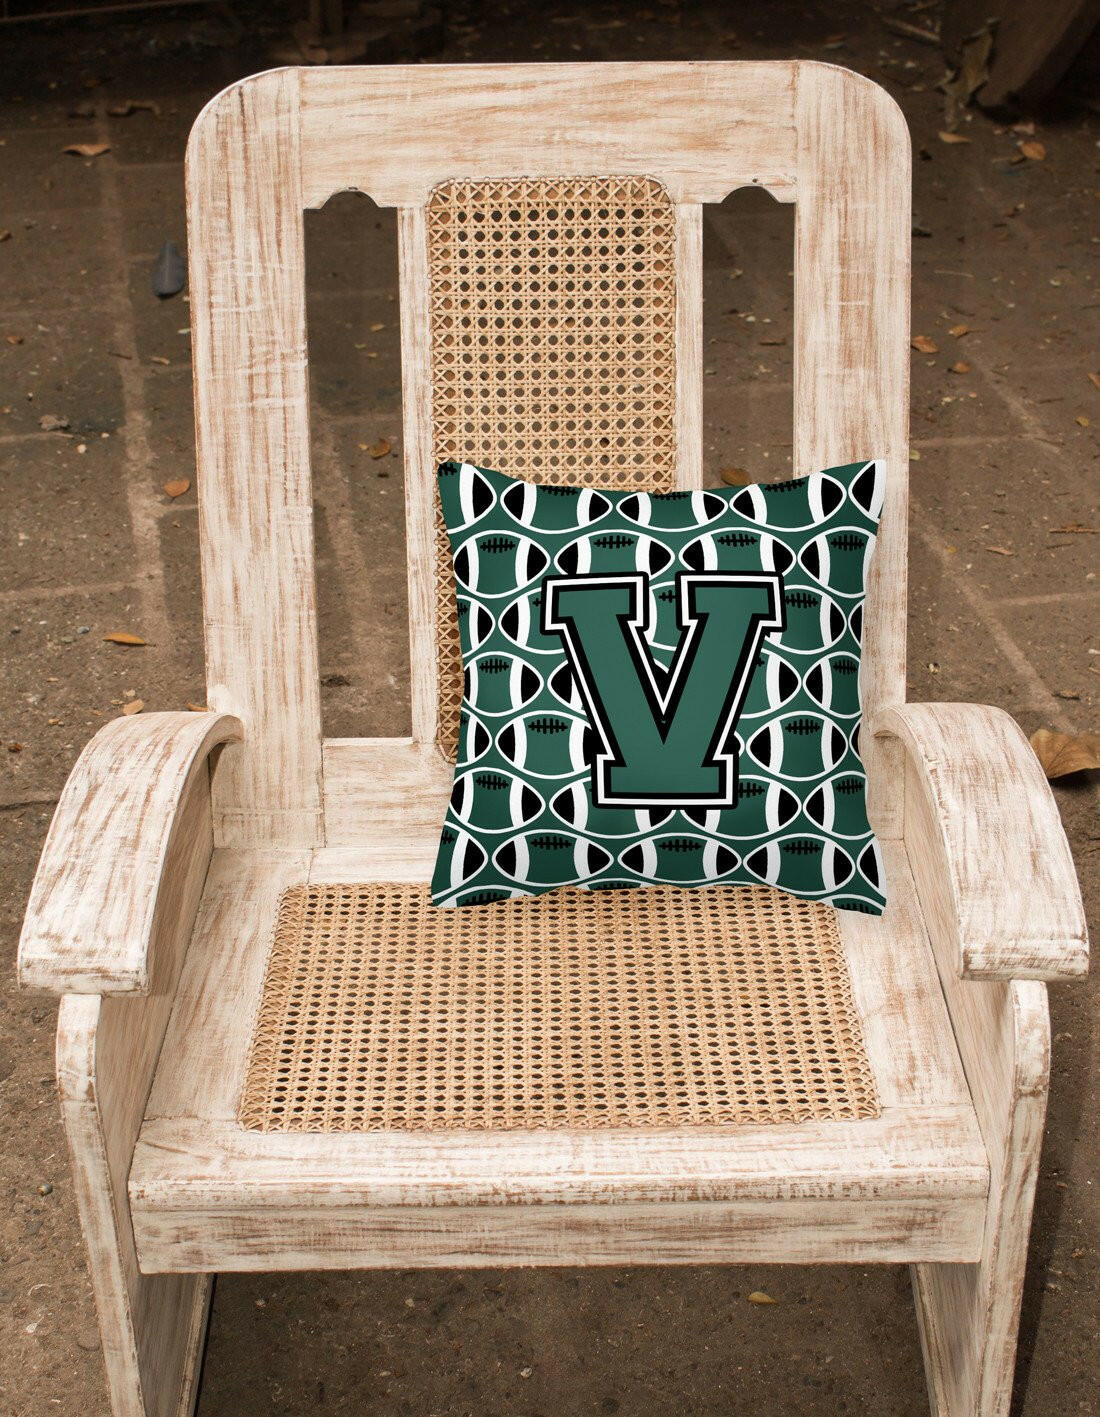 Letter V Football Green and White Fabric Decorative Pillow CJ1071-VPW1414 by Caroline's Treasures